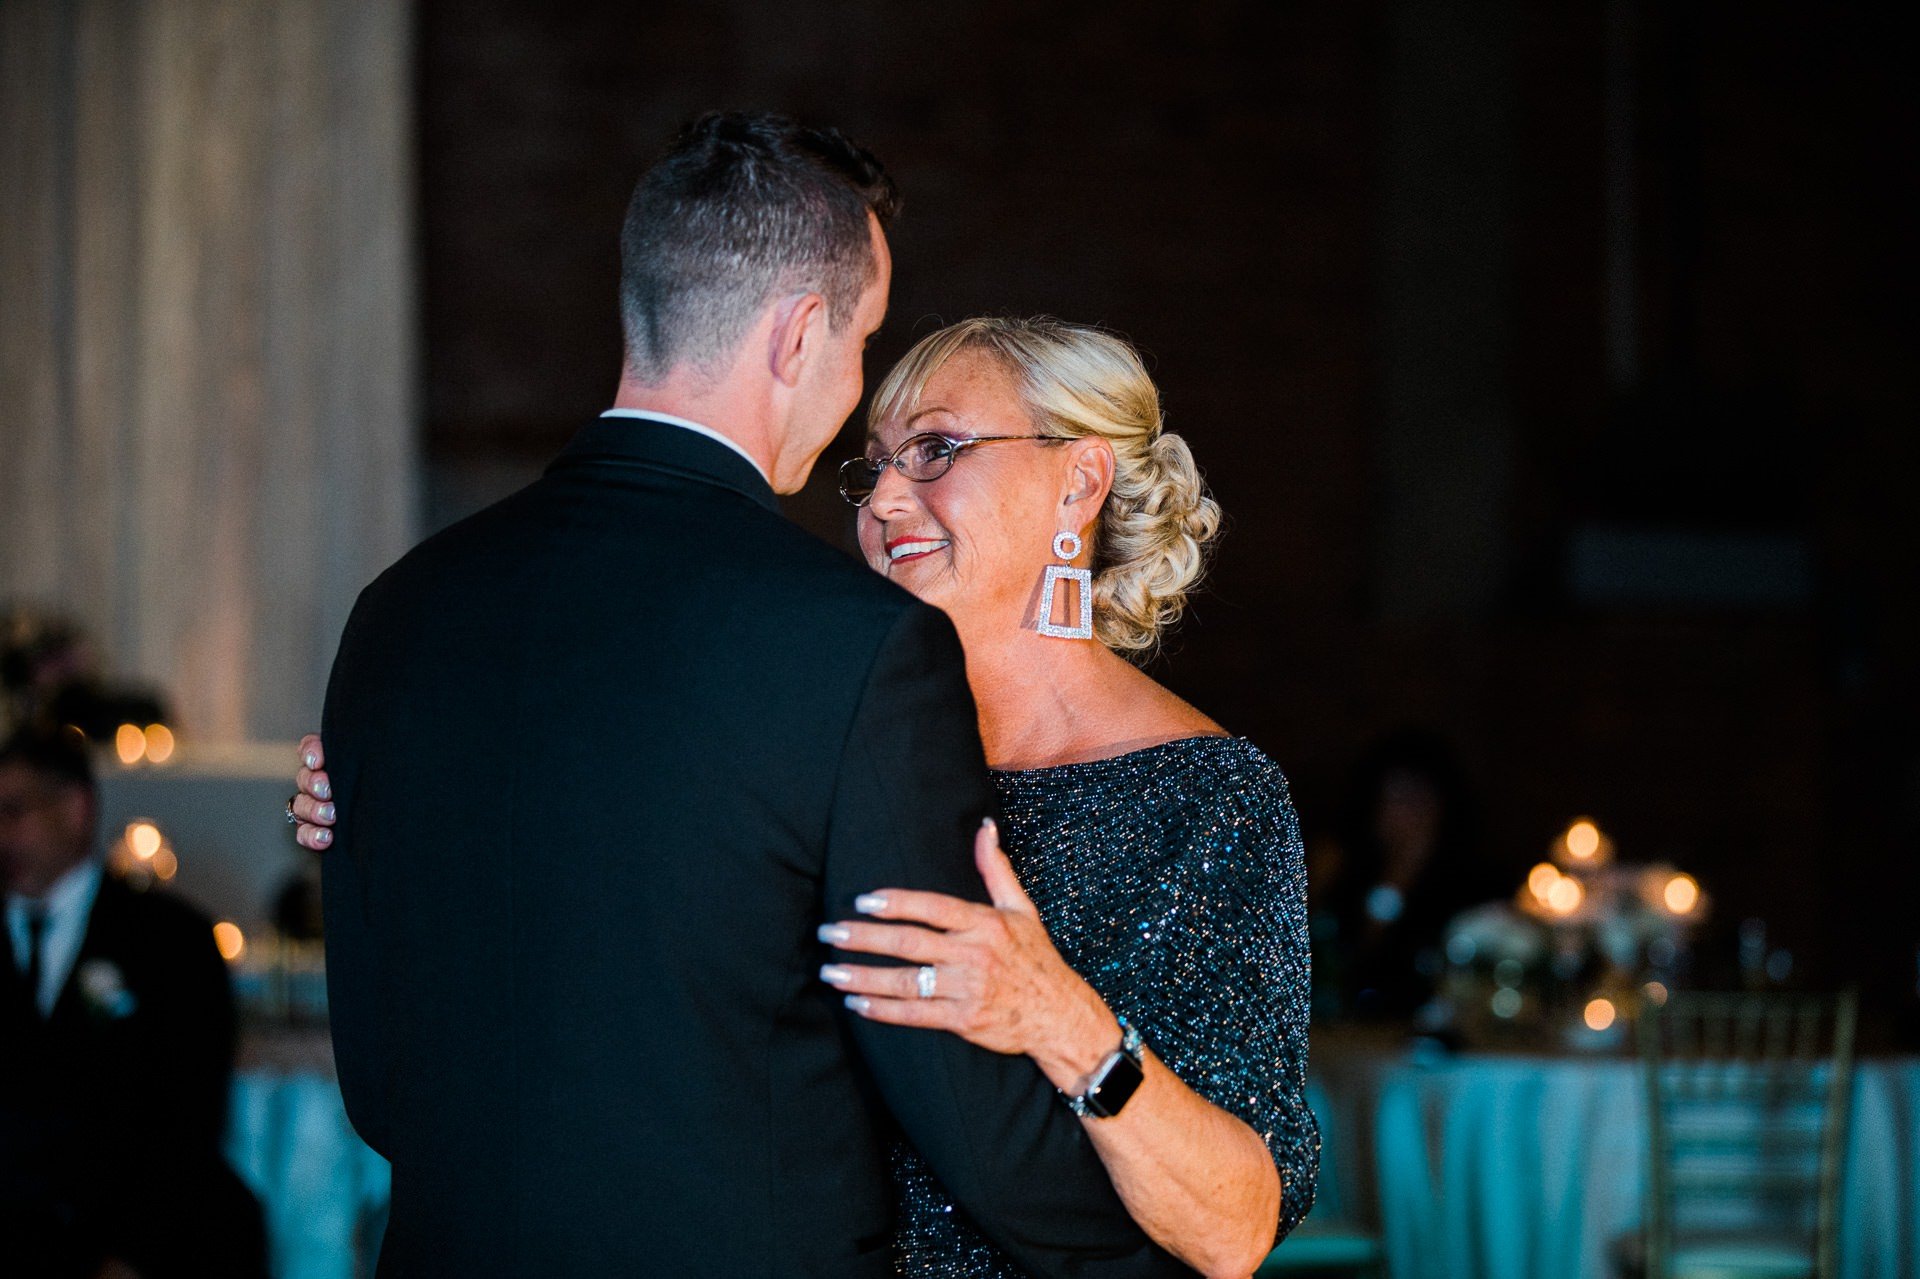 Cleveland Wedding Photographer at Windows on the River 02 9.jpg